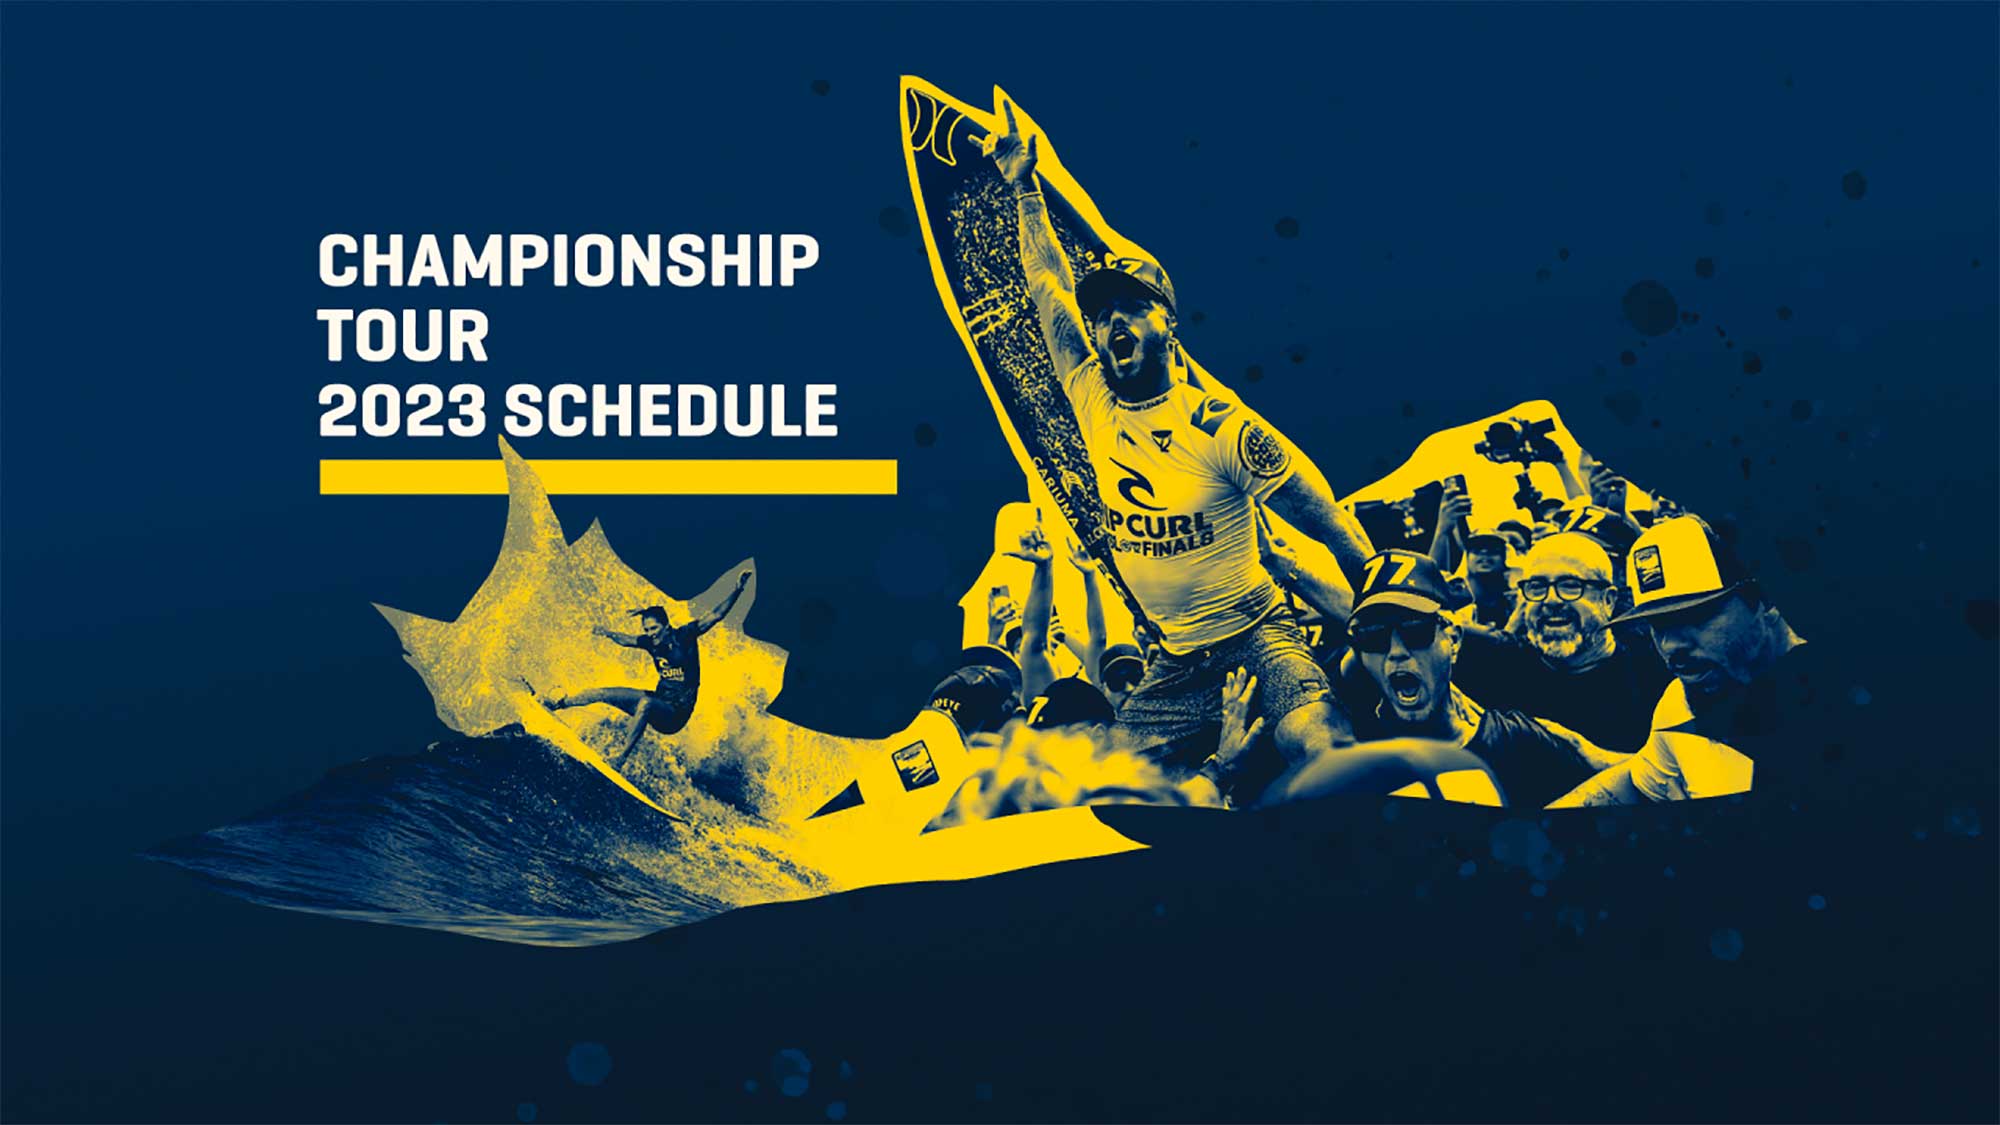 2023 SCHEDULE WSL CHAMPIONSHIP AND LONGBOARD TOUR Bear Surfboards